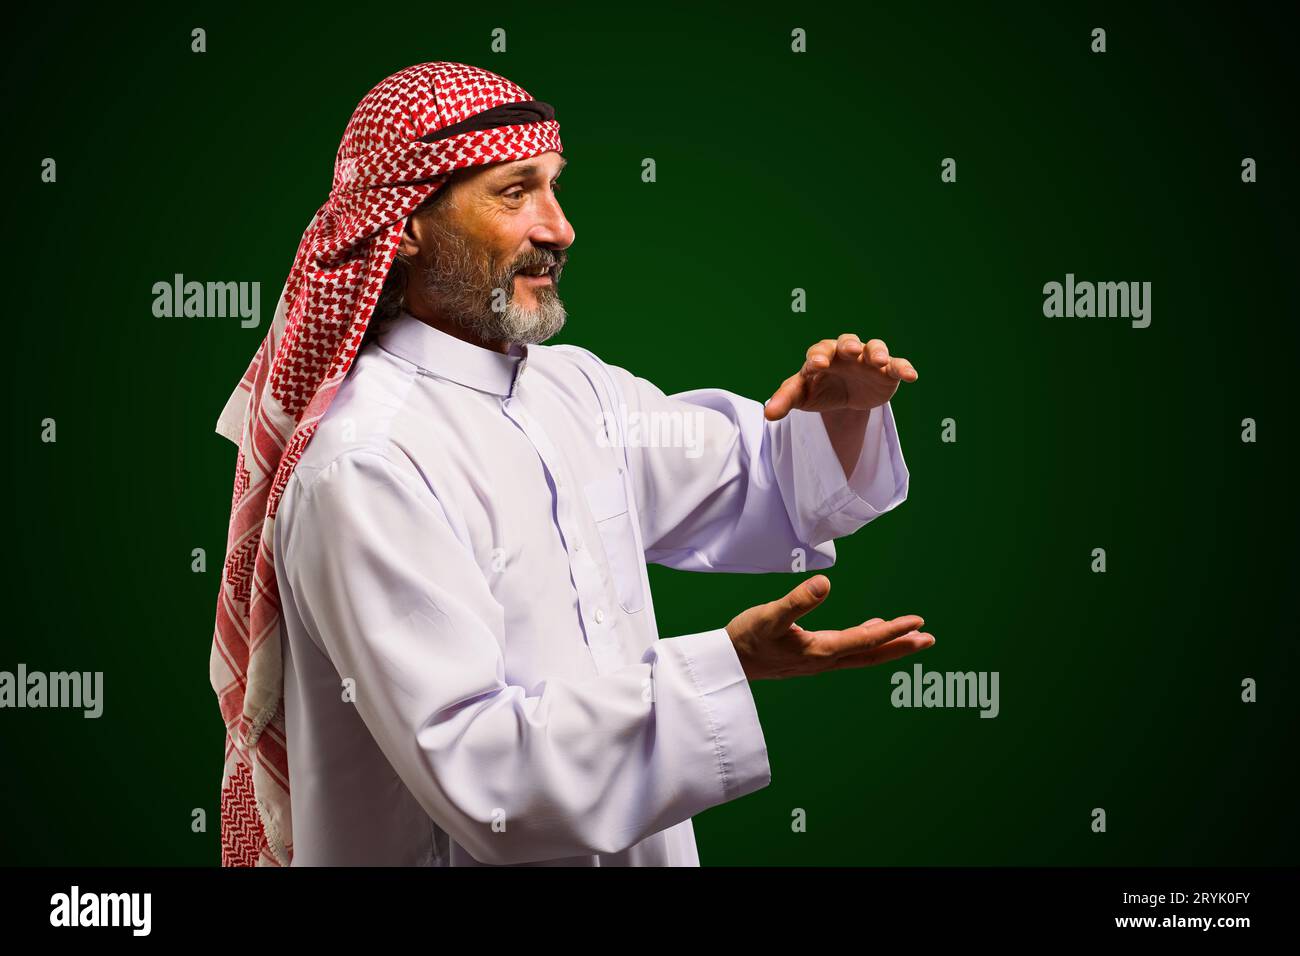 Arab sorcerer forming energy ball with his hands, performs mystical ritual. Mystical and supernatural aspects of traditional Ara Stock Photo